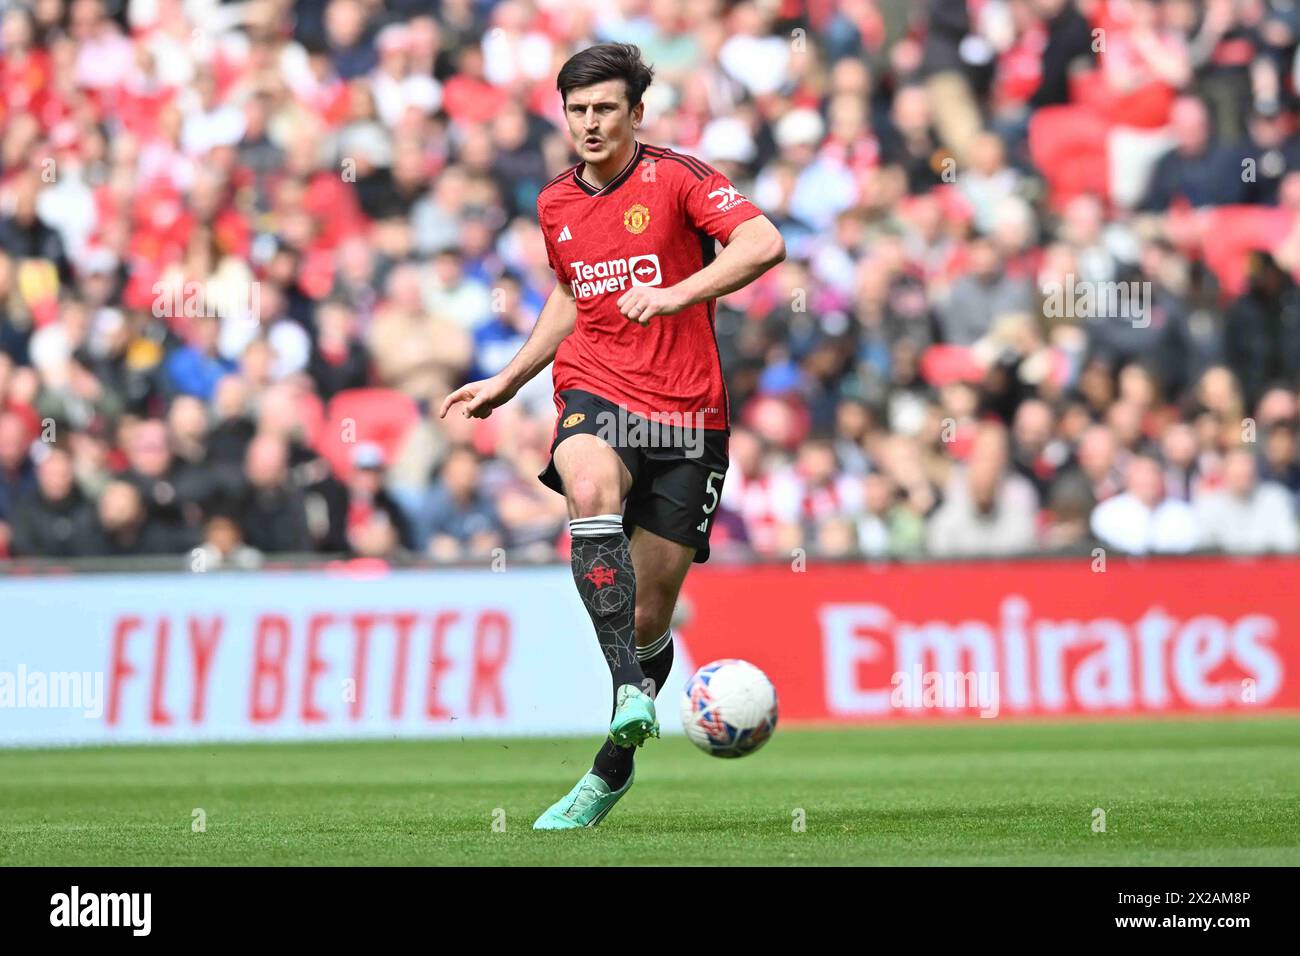 Wembley Stadium, London on Sunday 21st April 2024. Harry Maguire (5 Manchester United) Passes the ball during the FA Cup Semi Final match between Coventry City and Manchester City at Wembley Stadium, London on Sunday 21st April 2024. (Photo: Kevin Hodgson | MI News) Credit: MI News & Sport /Alamy Live News Stock Photo